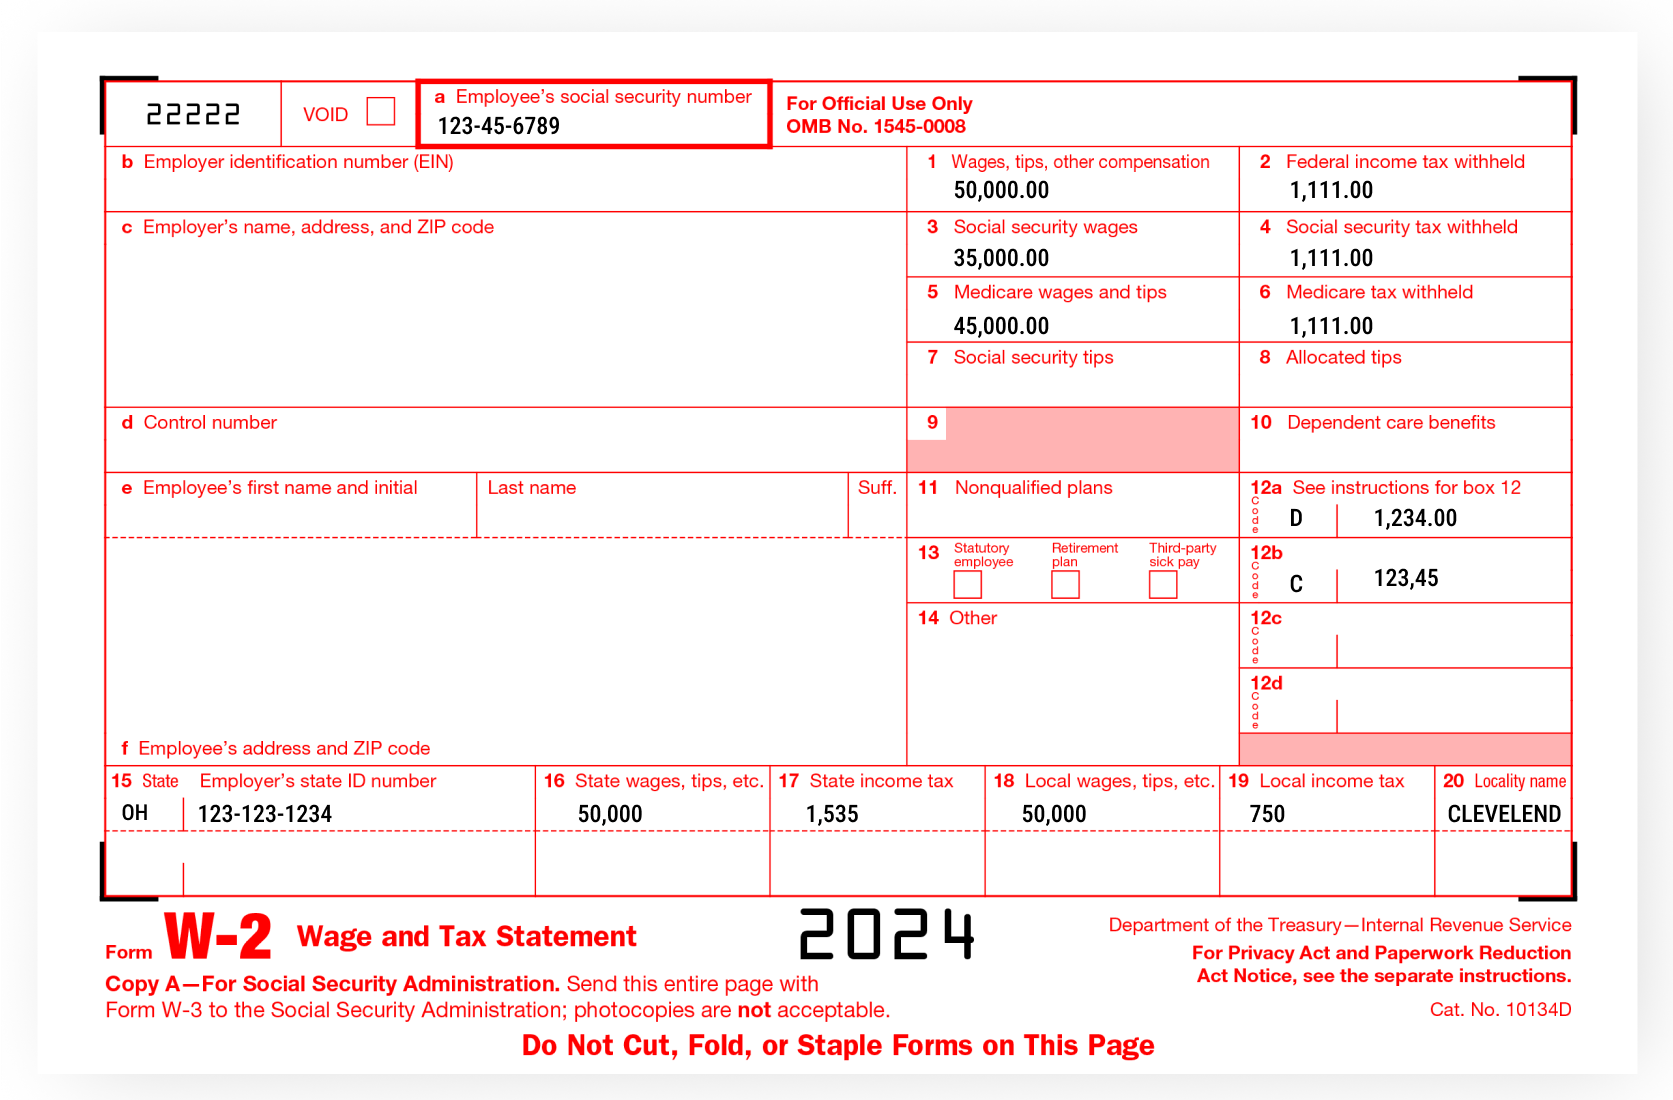 How To Fill Out Irs W2 Form Pdf 2023-2024 | Pdf Expert with 2023 W2 Form Pdf